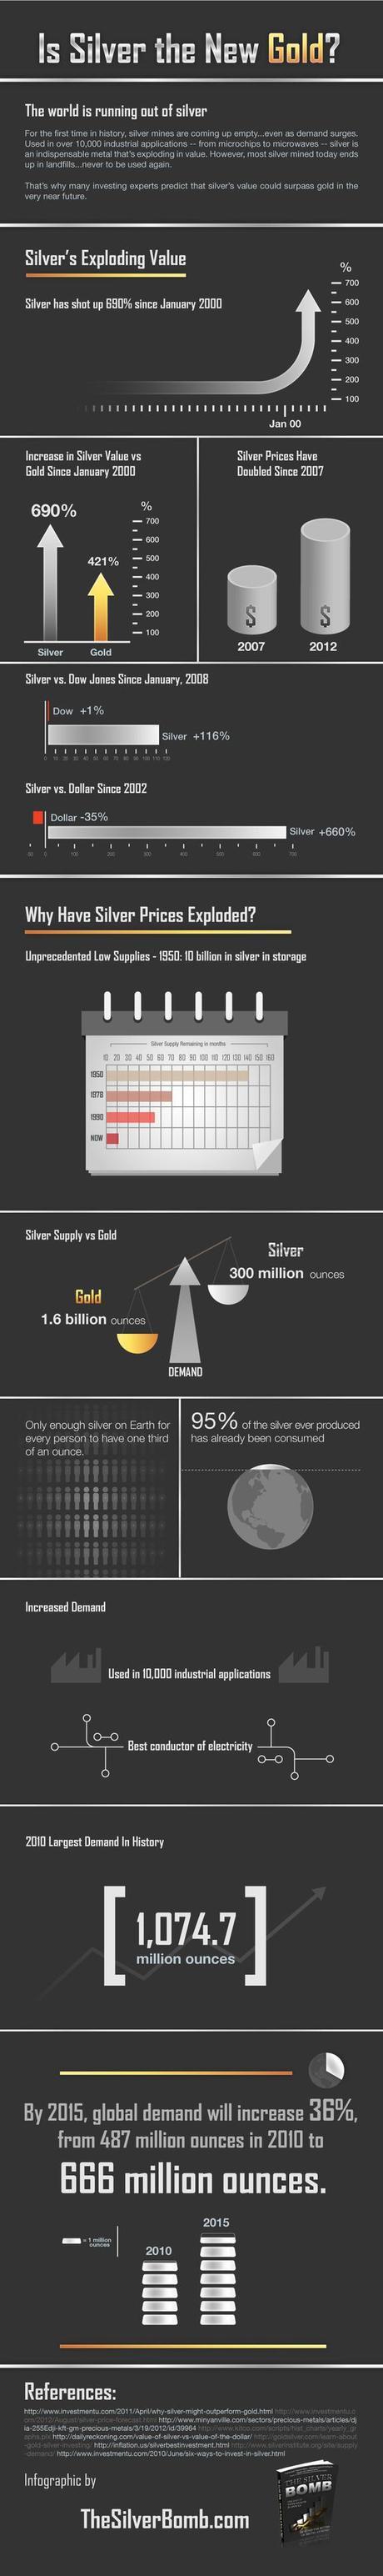 Is Silver the New Gold infographic